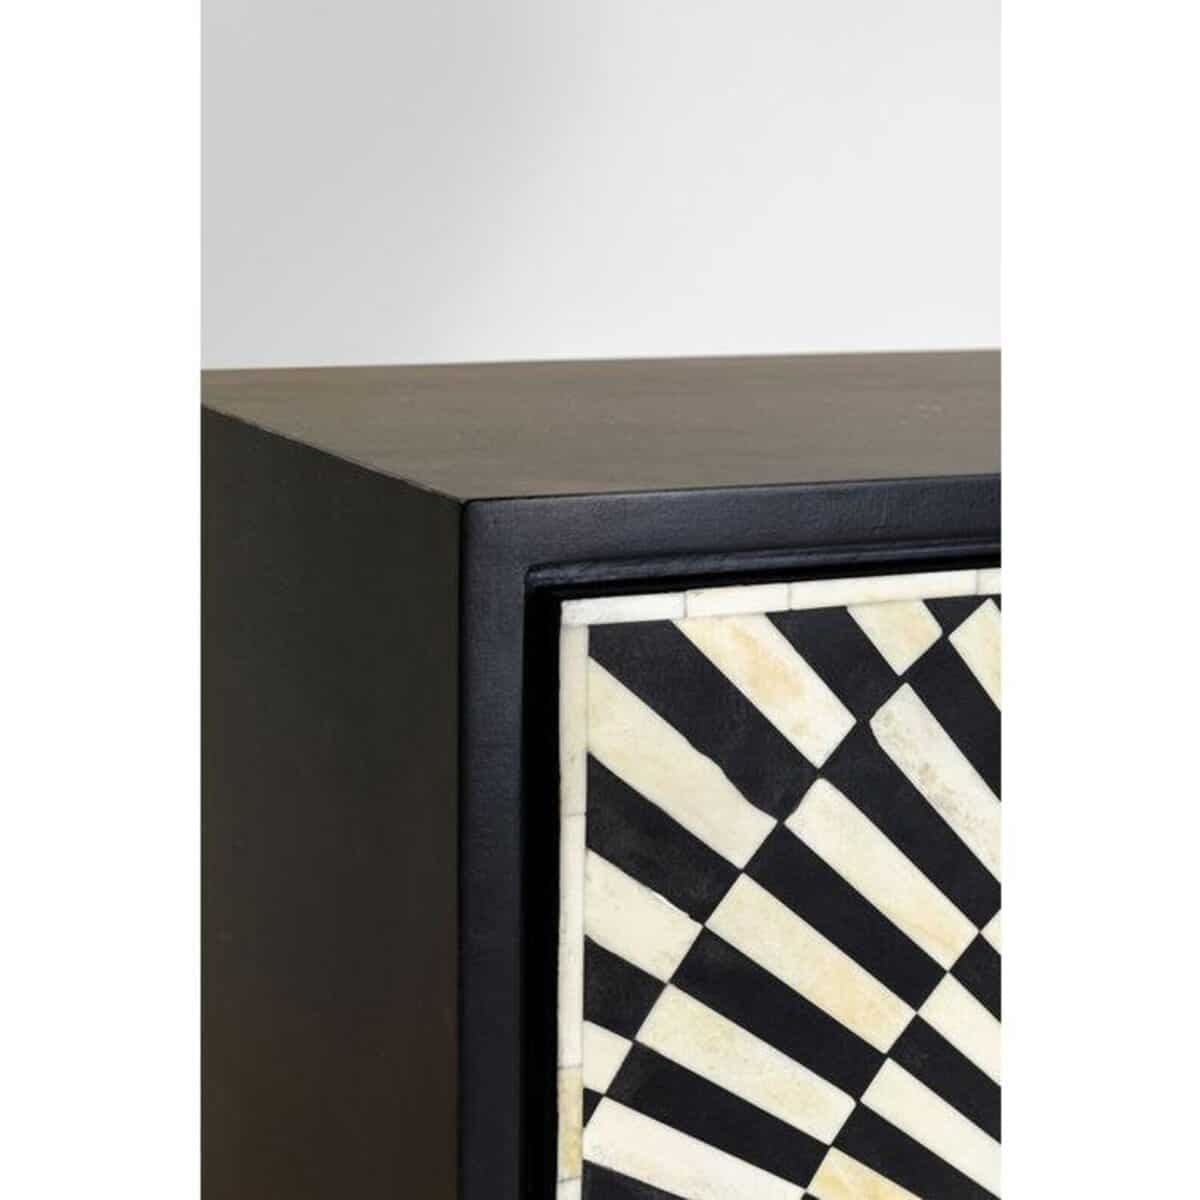 Isabella Bone Inlay Bar Cabinet in Black and White